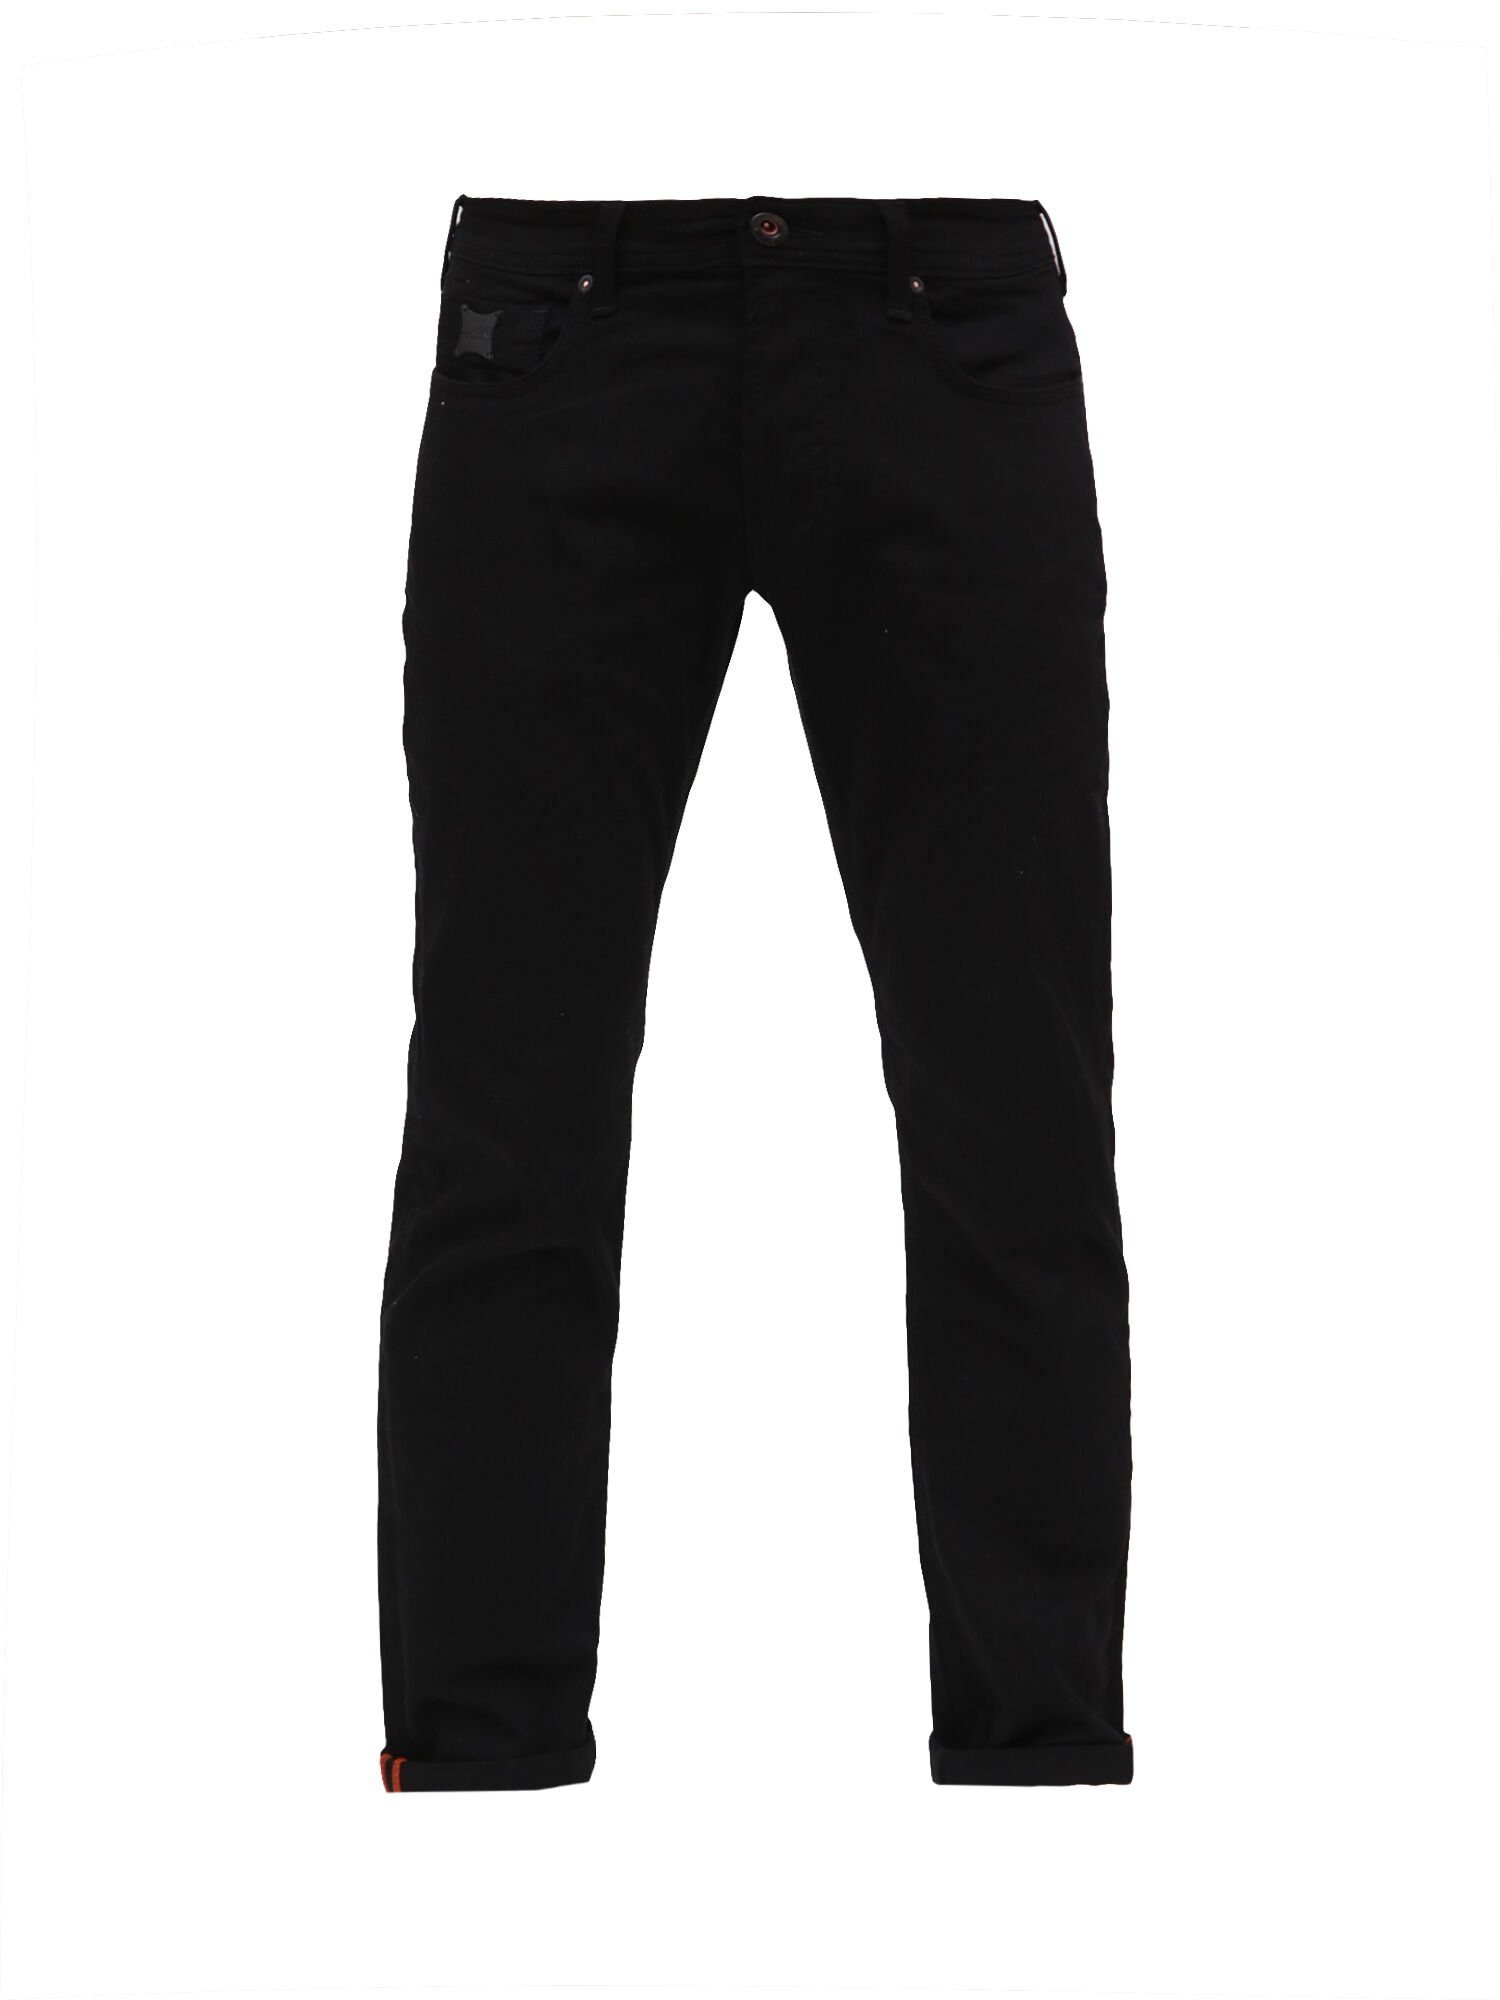 of Wash im Relax-fit-Jeans Miracle Denim Black 5-Pocket-Style Thomas